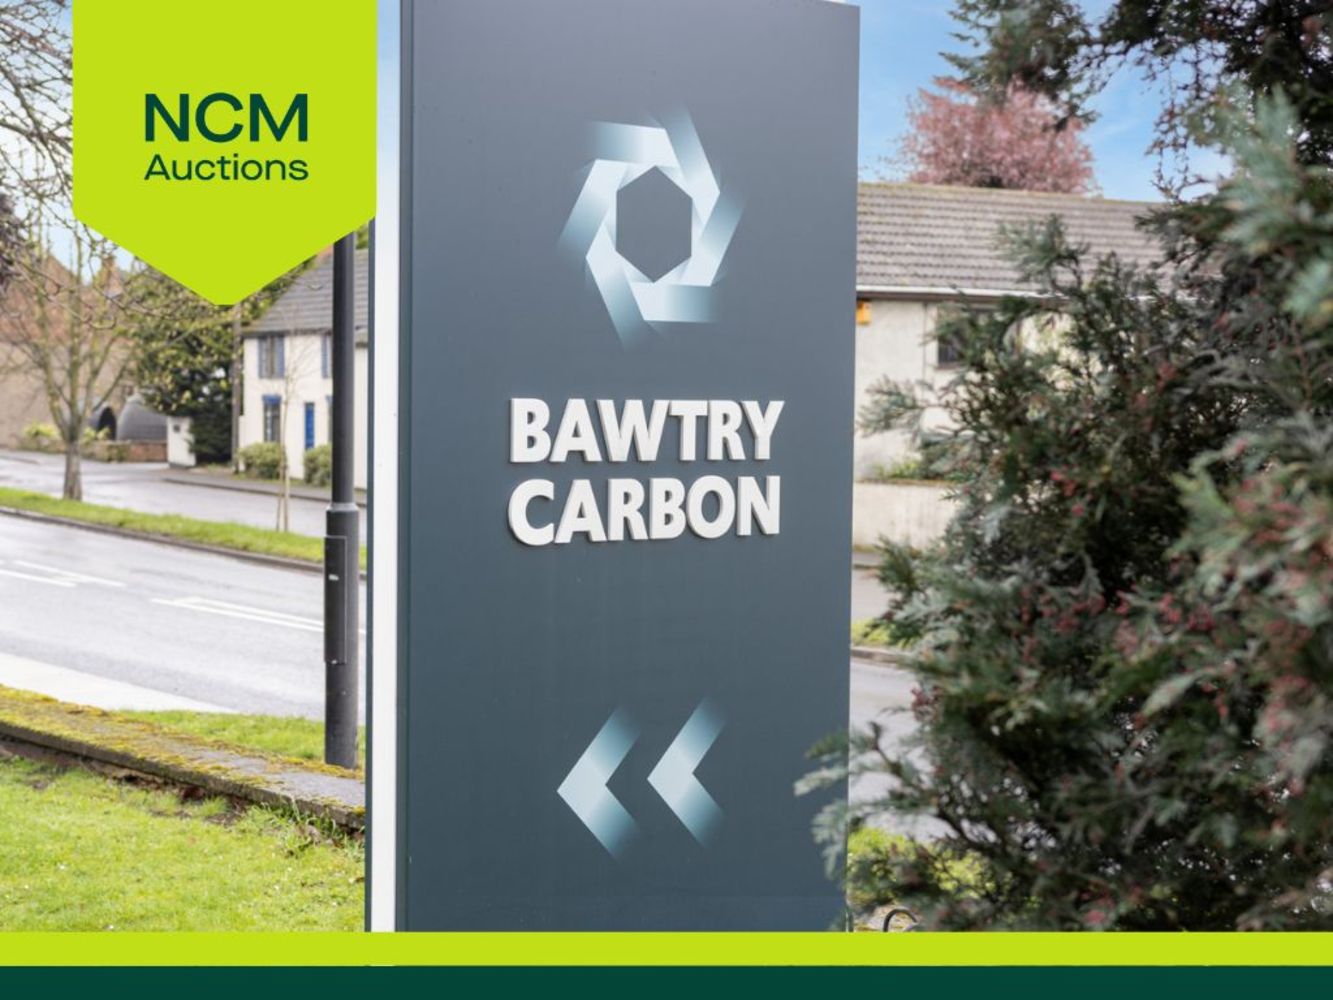 Entire Contents of Bawtry Carbon Inc Forklifts, Production & Manufacturing Machinery, Racking & Tools - Due To Closure - Live Auction Bid Online